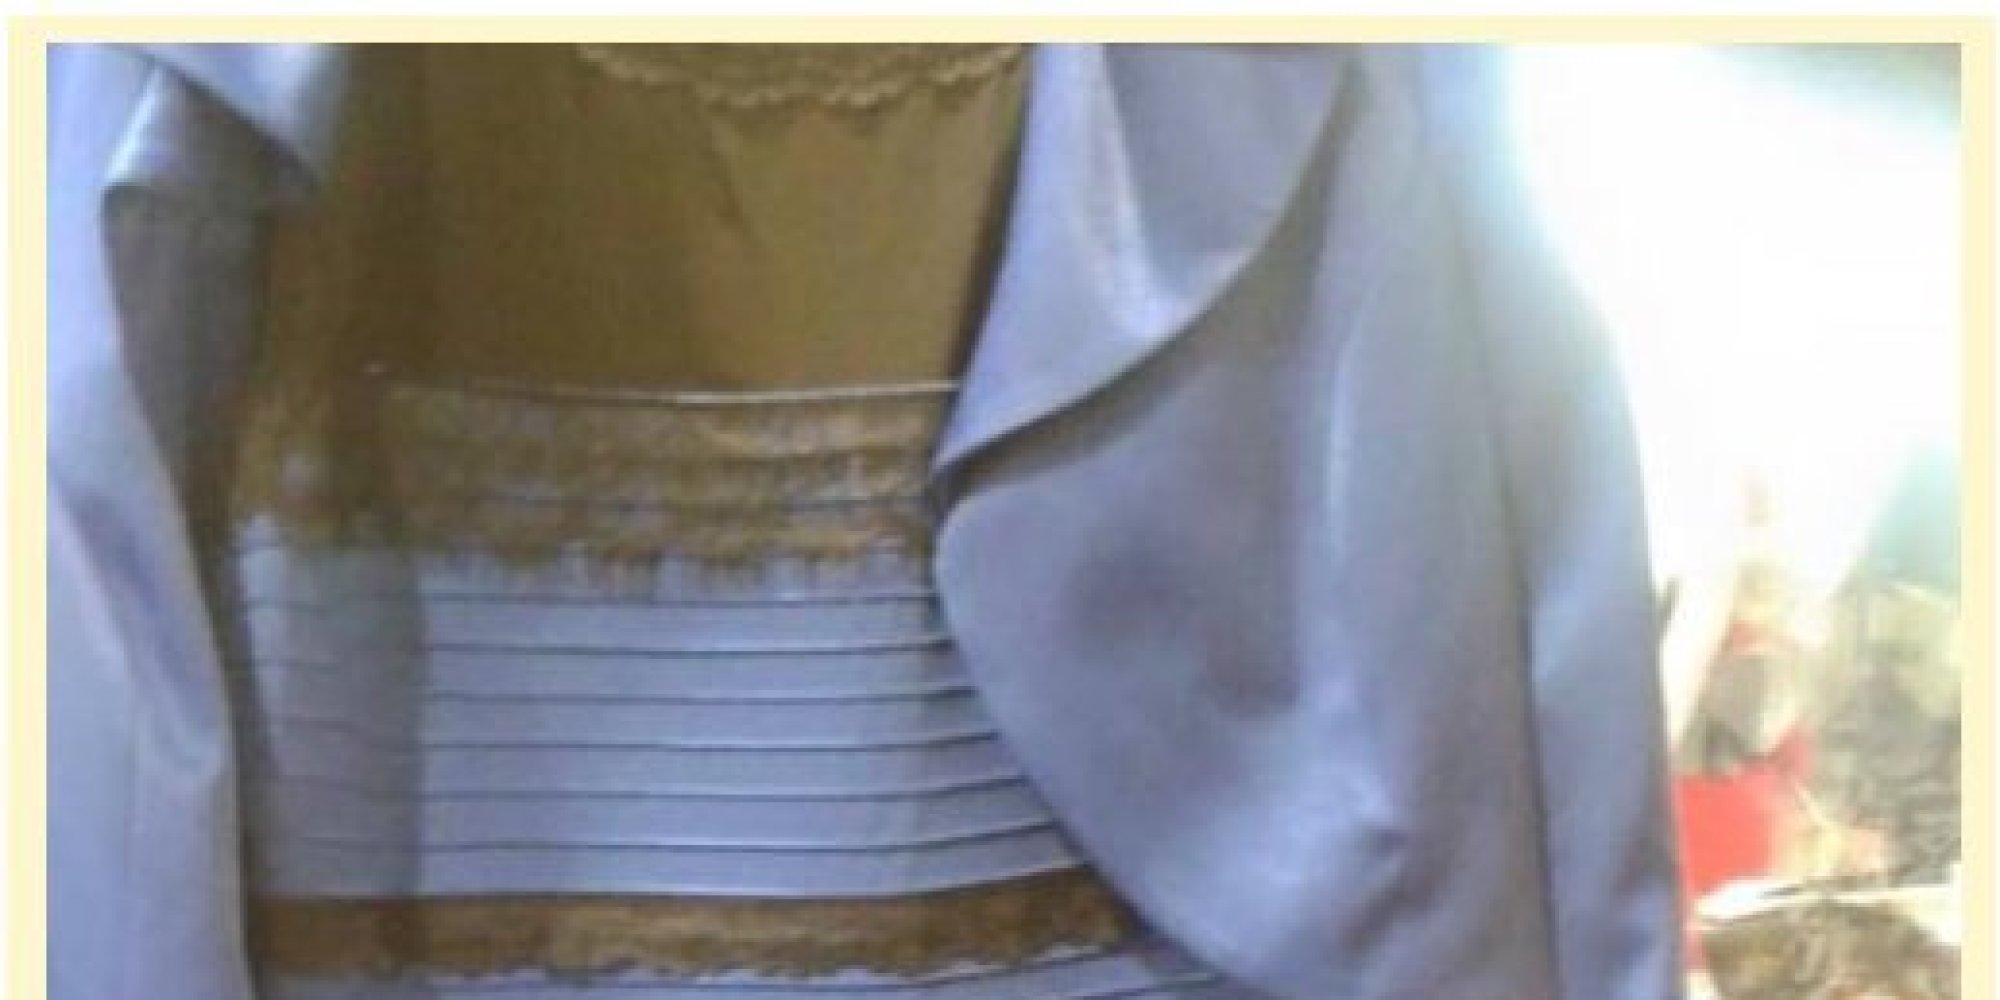 White And Gold Dress Is Leading Blue And Black Dress In #TheDress